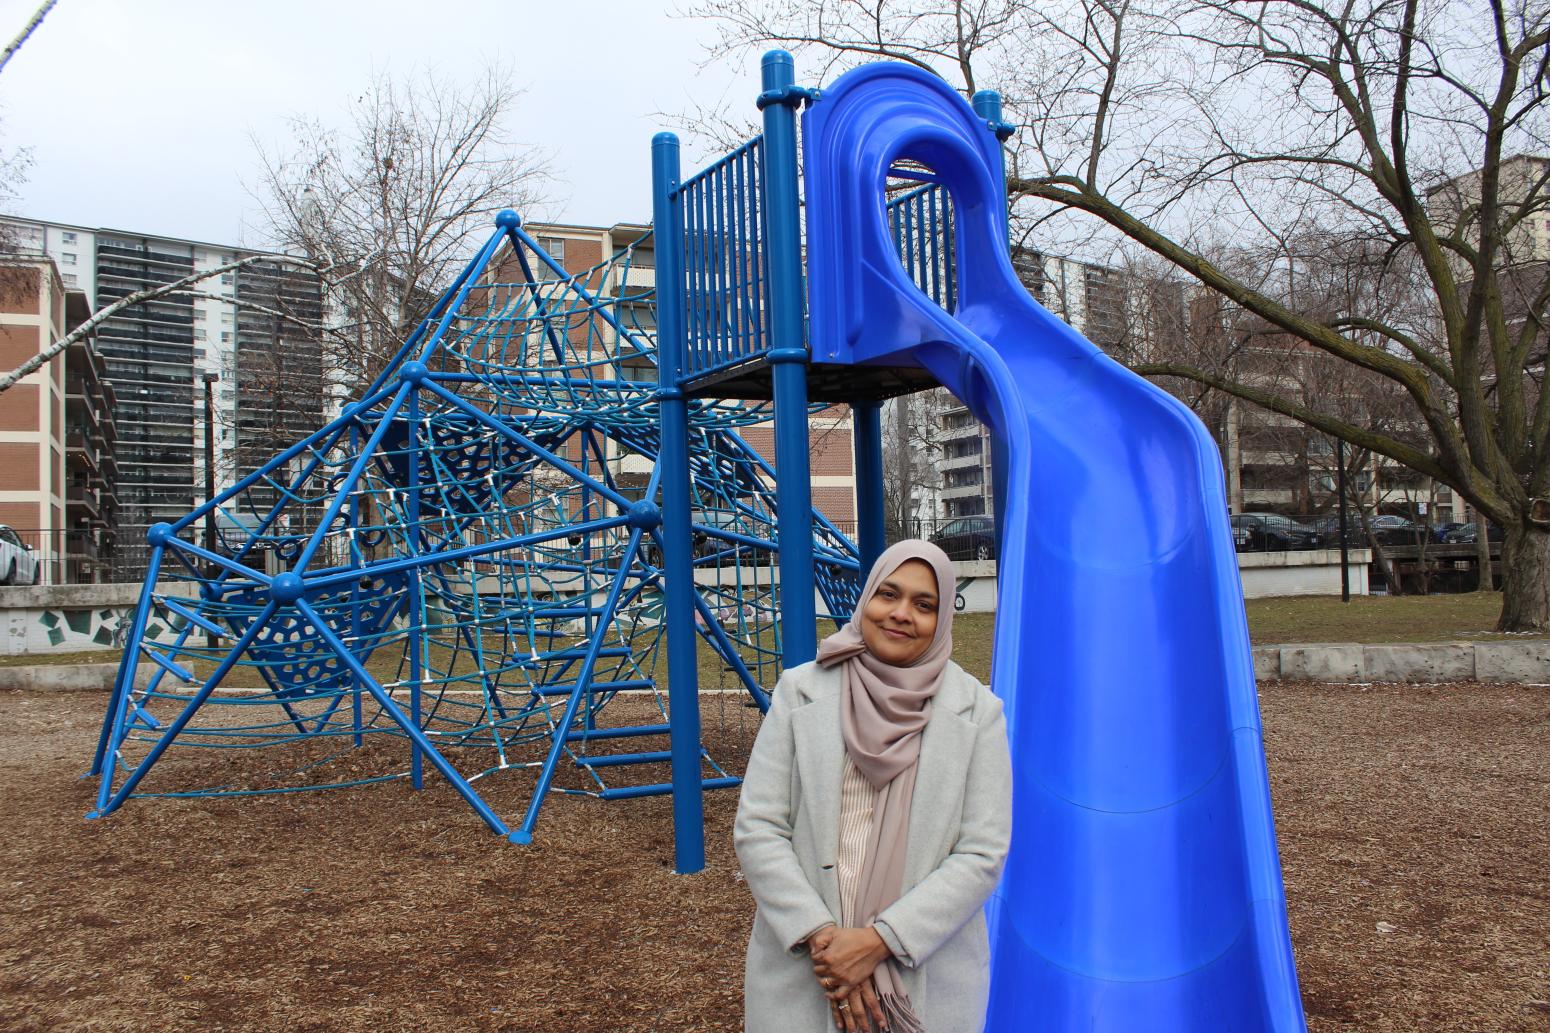 A person is standing besides a blue playground slide